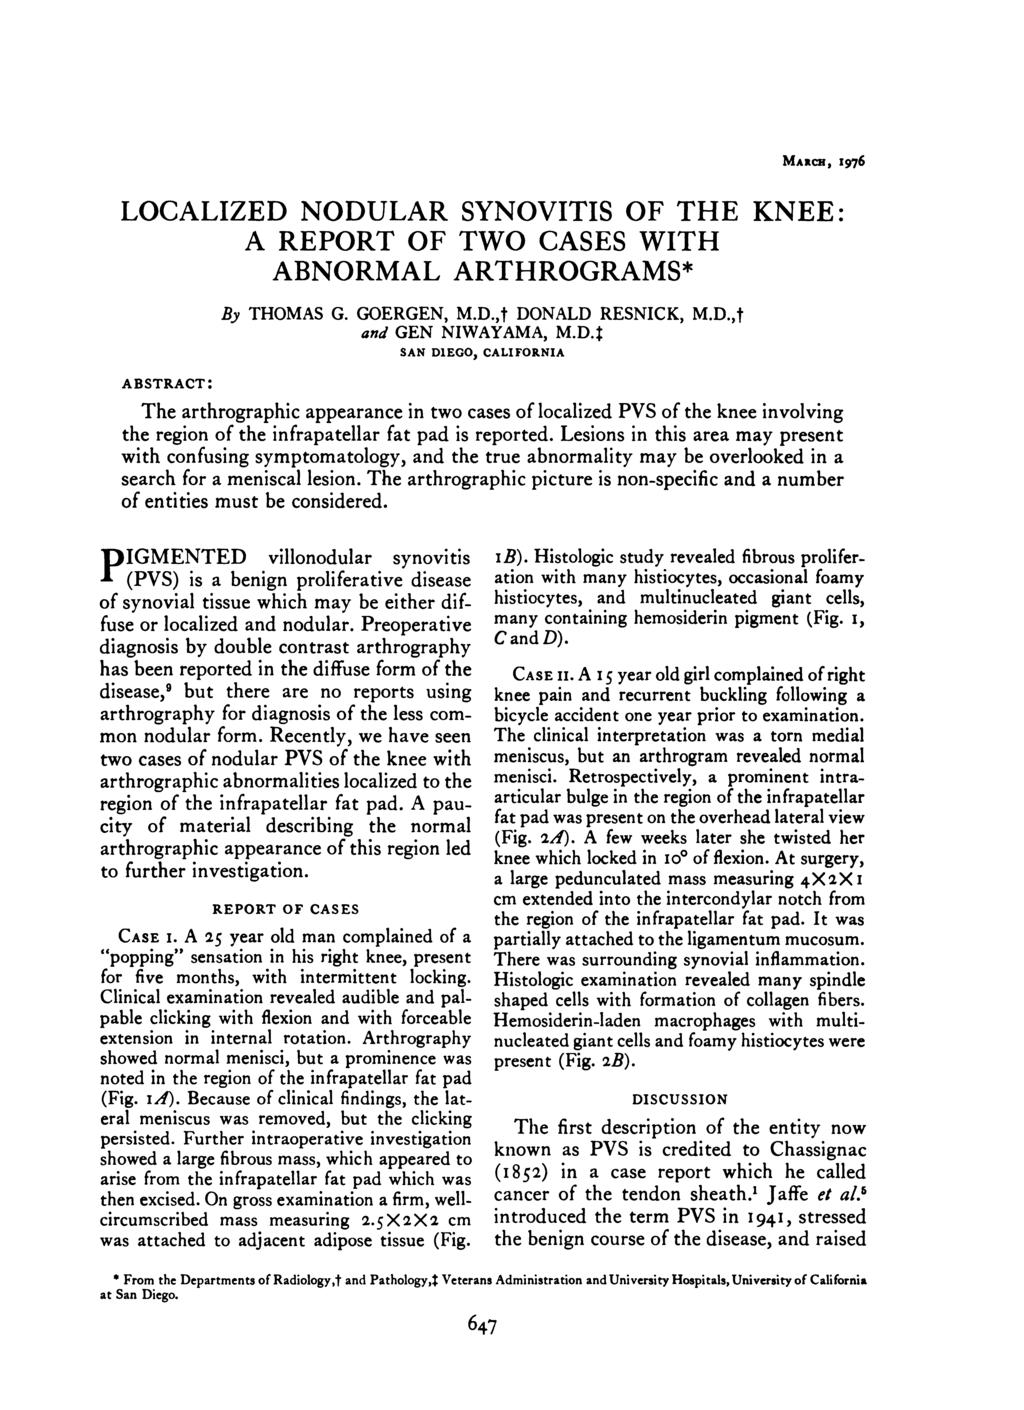 MARcH, i6 LOCALIZED NODULAR SYNOVITIS OF THE KNEE: A REPORT OF TWO CASES WITH ABNORMAL ARTHROGRAMS* ABSTRACT: By THOMAS G. GOERGEN, M.D.,t DONALD RESNICK, M.D.,t and GEM NIWAYAMA, M.